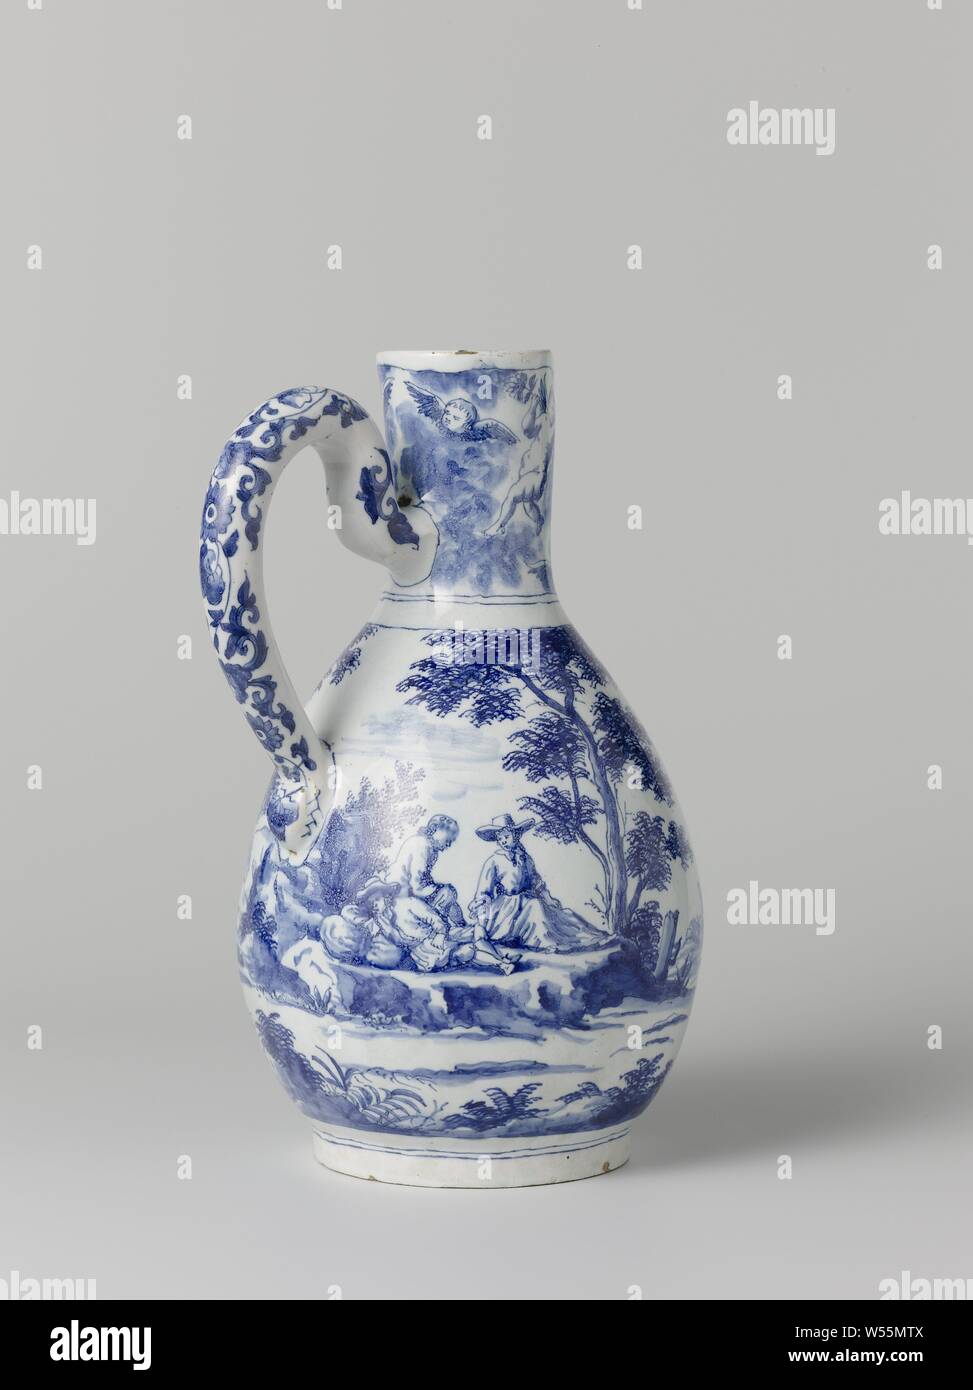 Tips overzien Ijveraar Three decorated jugs Pottery jug, Pottery pot, painted blue, (traveler)  resting in the open air, De Roos (attributed to), Delft, c. 1695 - c. 1720,  h 23.2 cm × w 17.0 cm × d 13.5 cm Stock Photo - Alamy